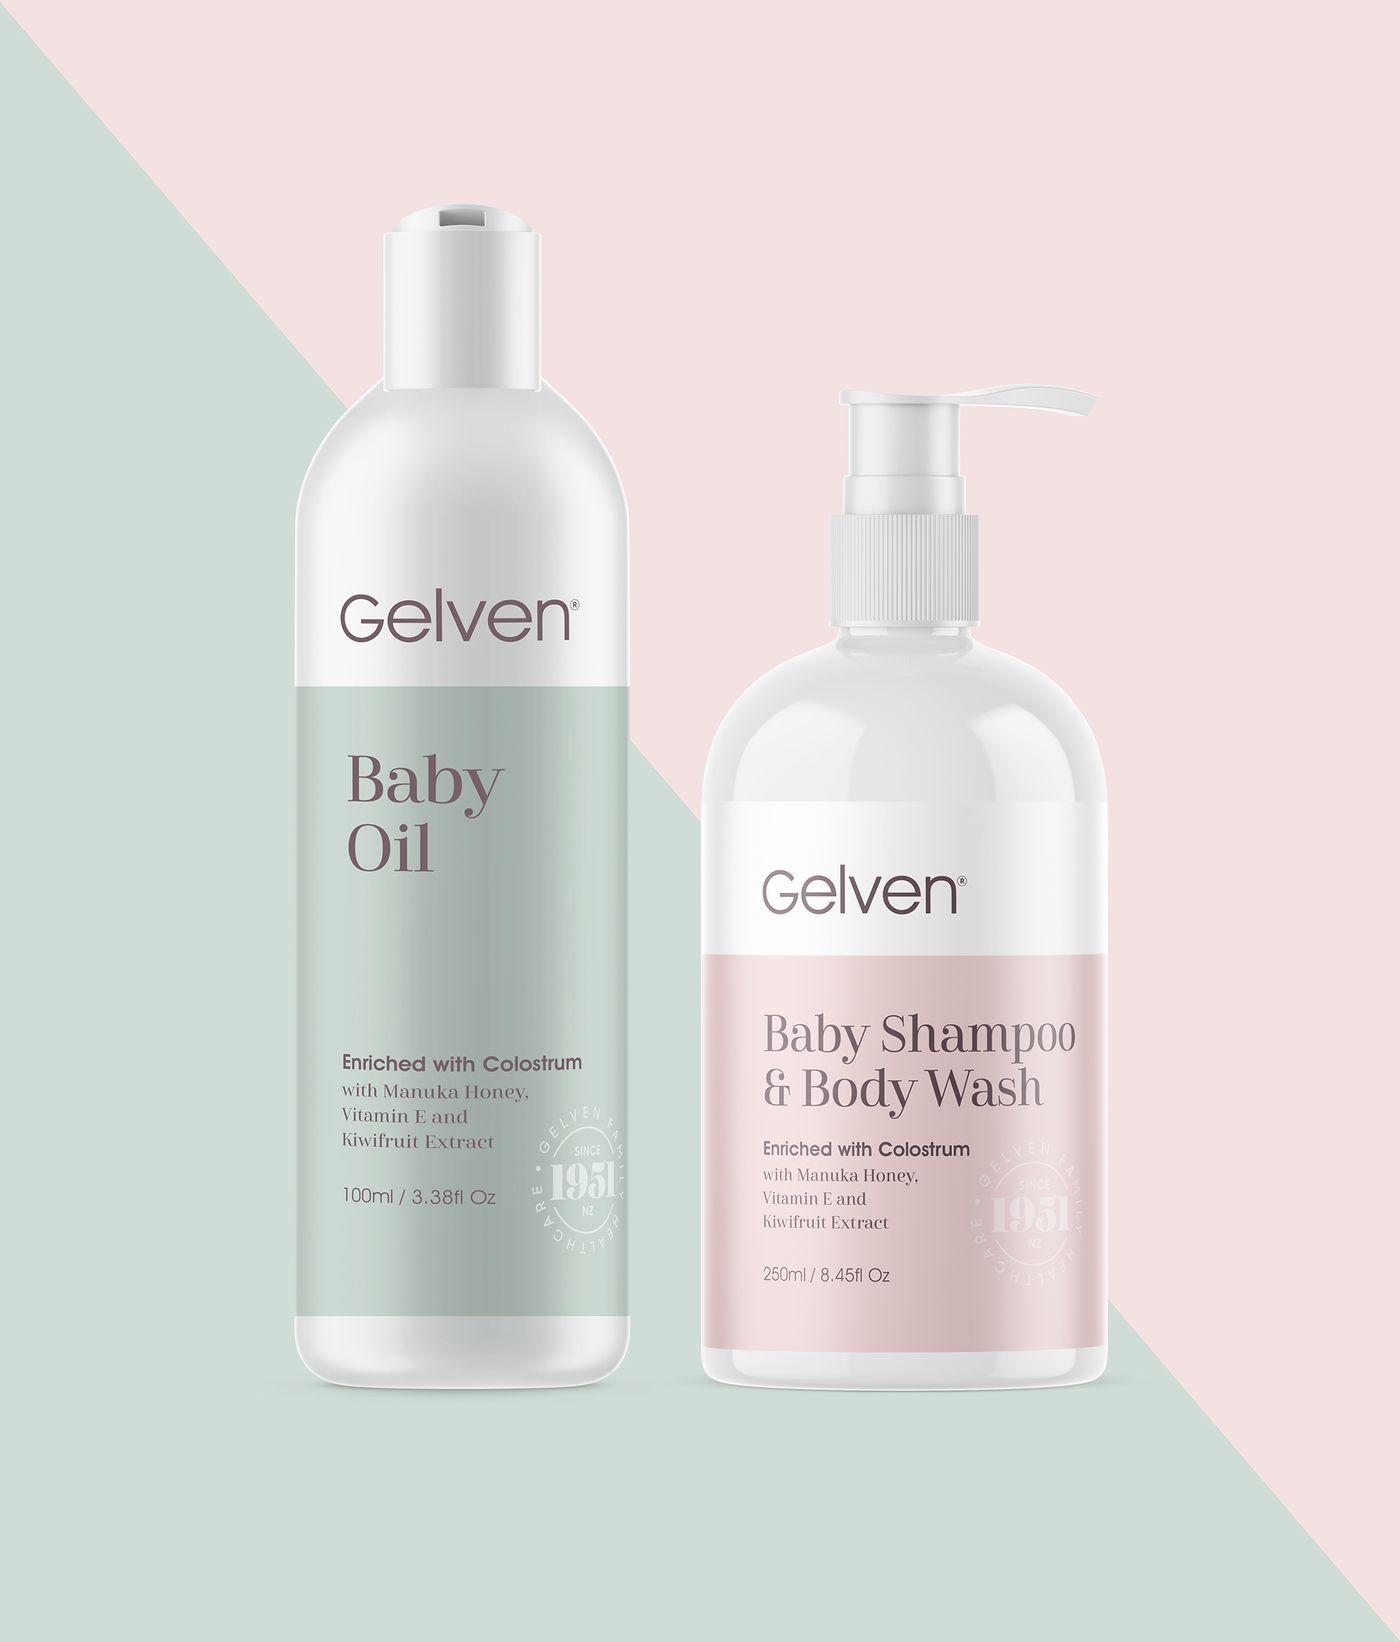 Gelven baby oil and body wash